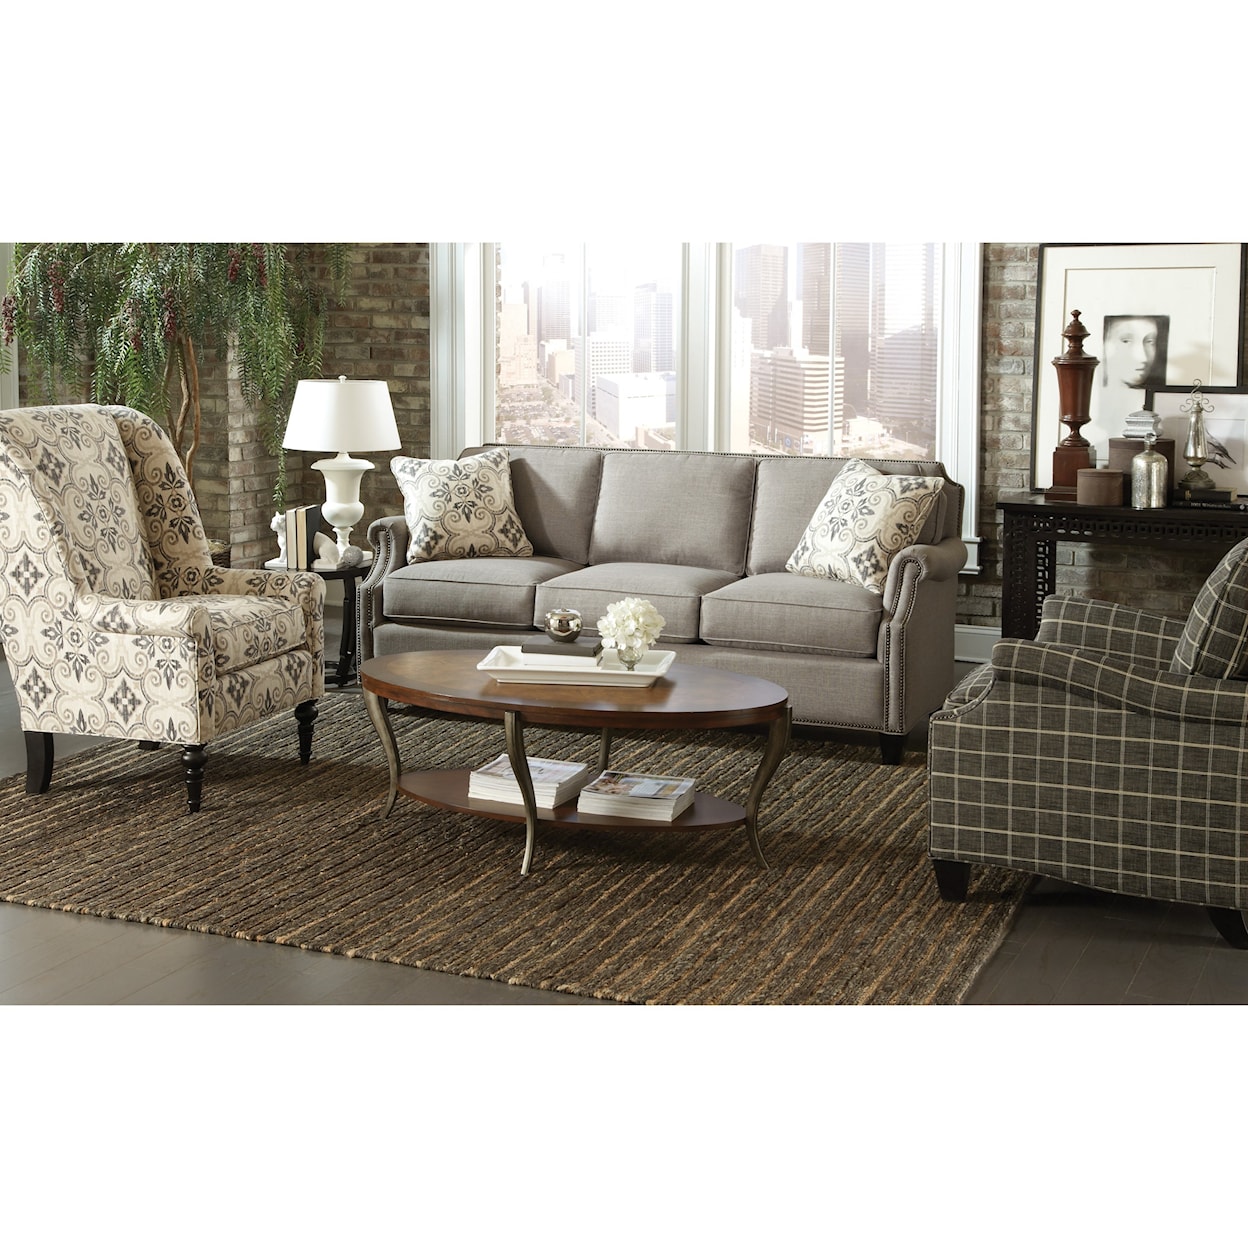 Craftmaster 938350BD Living Room Group